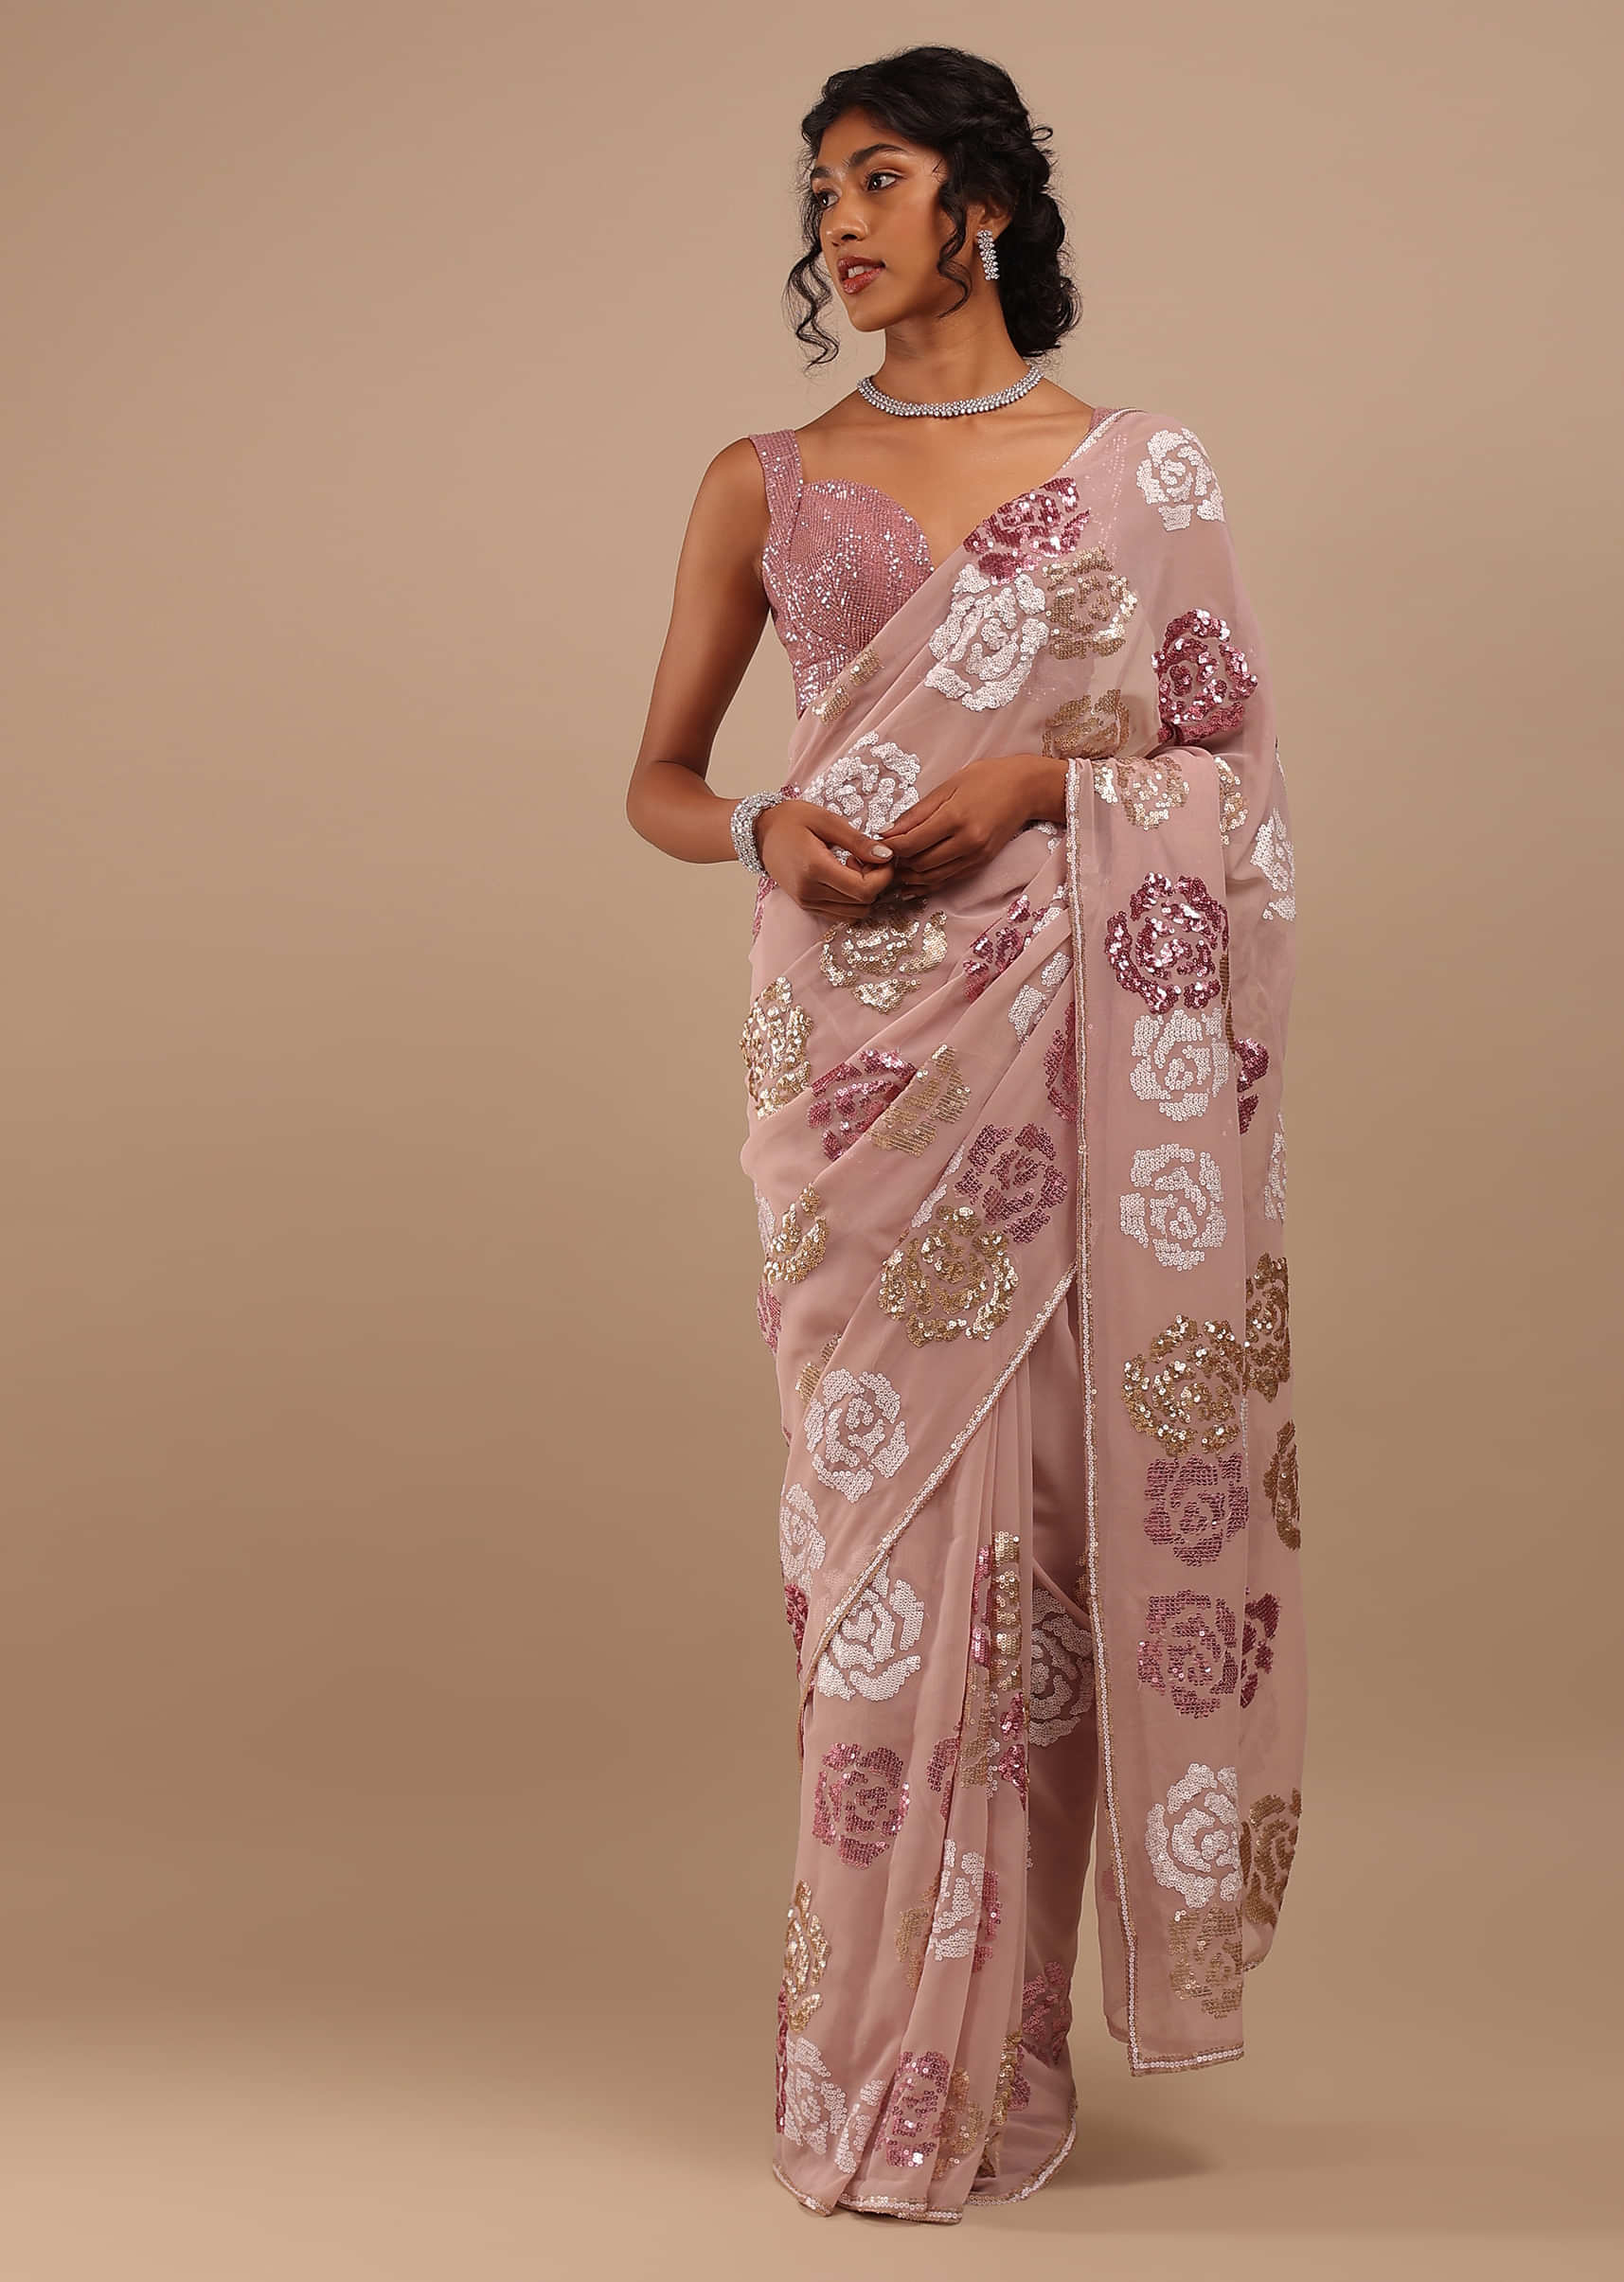 Hushed Lilac Multi-Color Sequins Saree In Floral Motifs Embroidery, Crafted In Chiffon With White And Gold Sequins On The Pallu Border